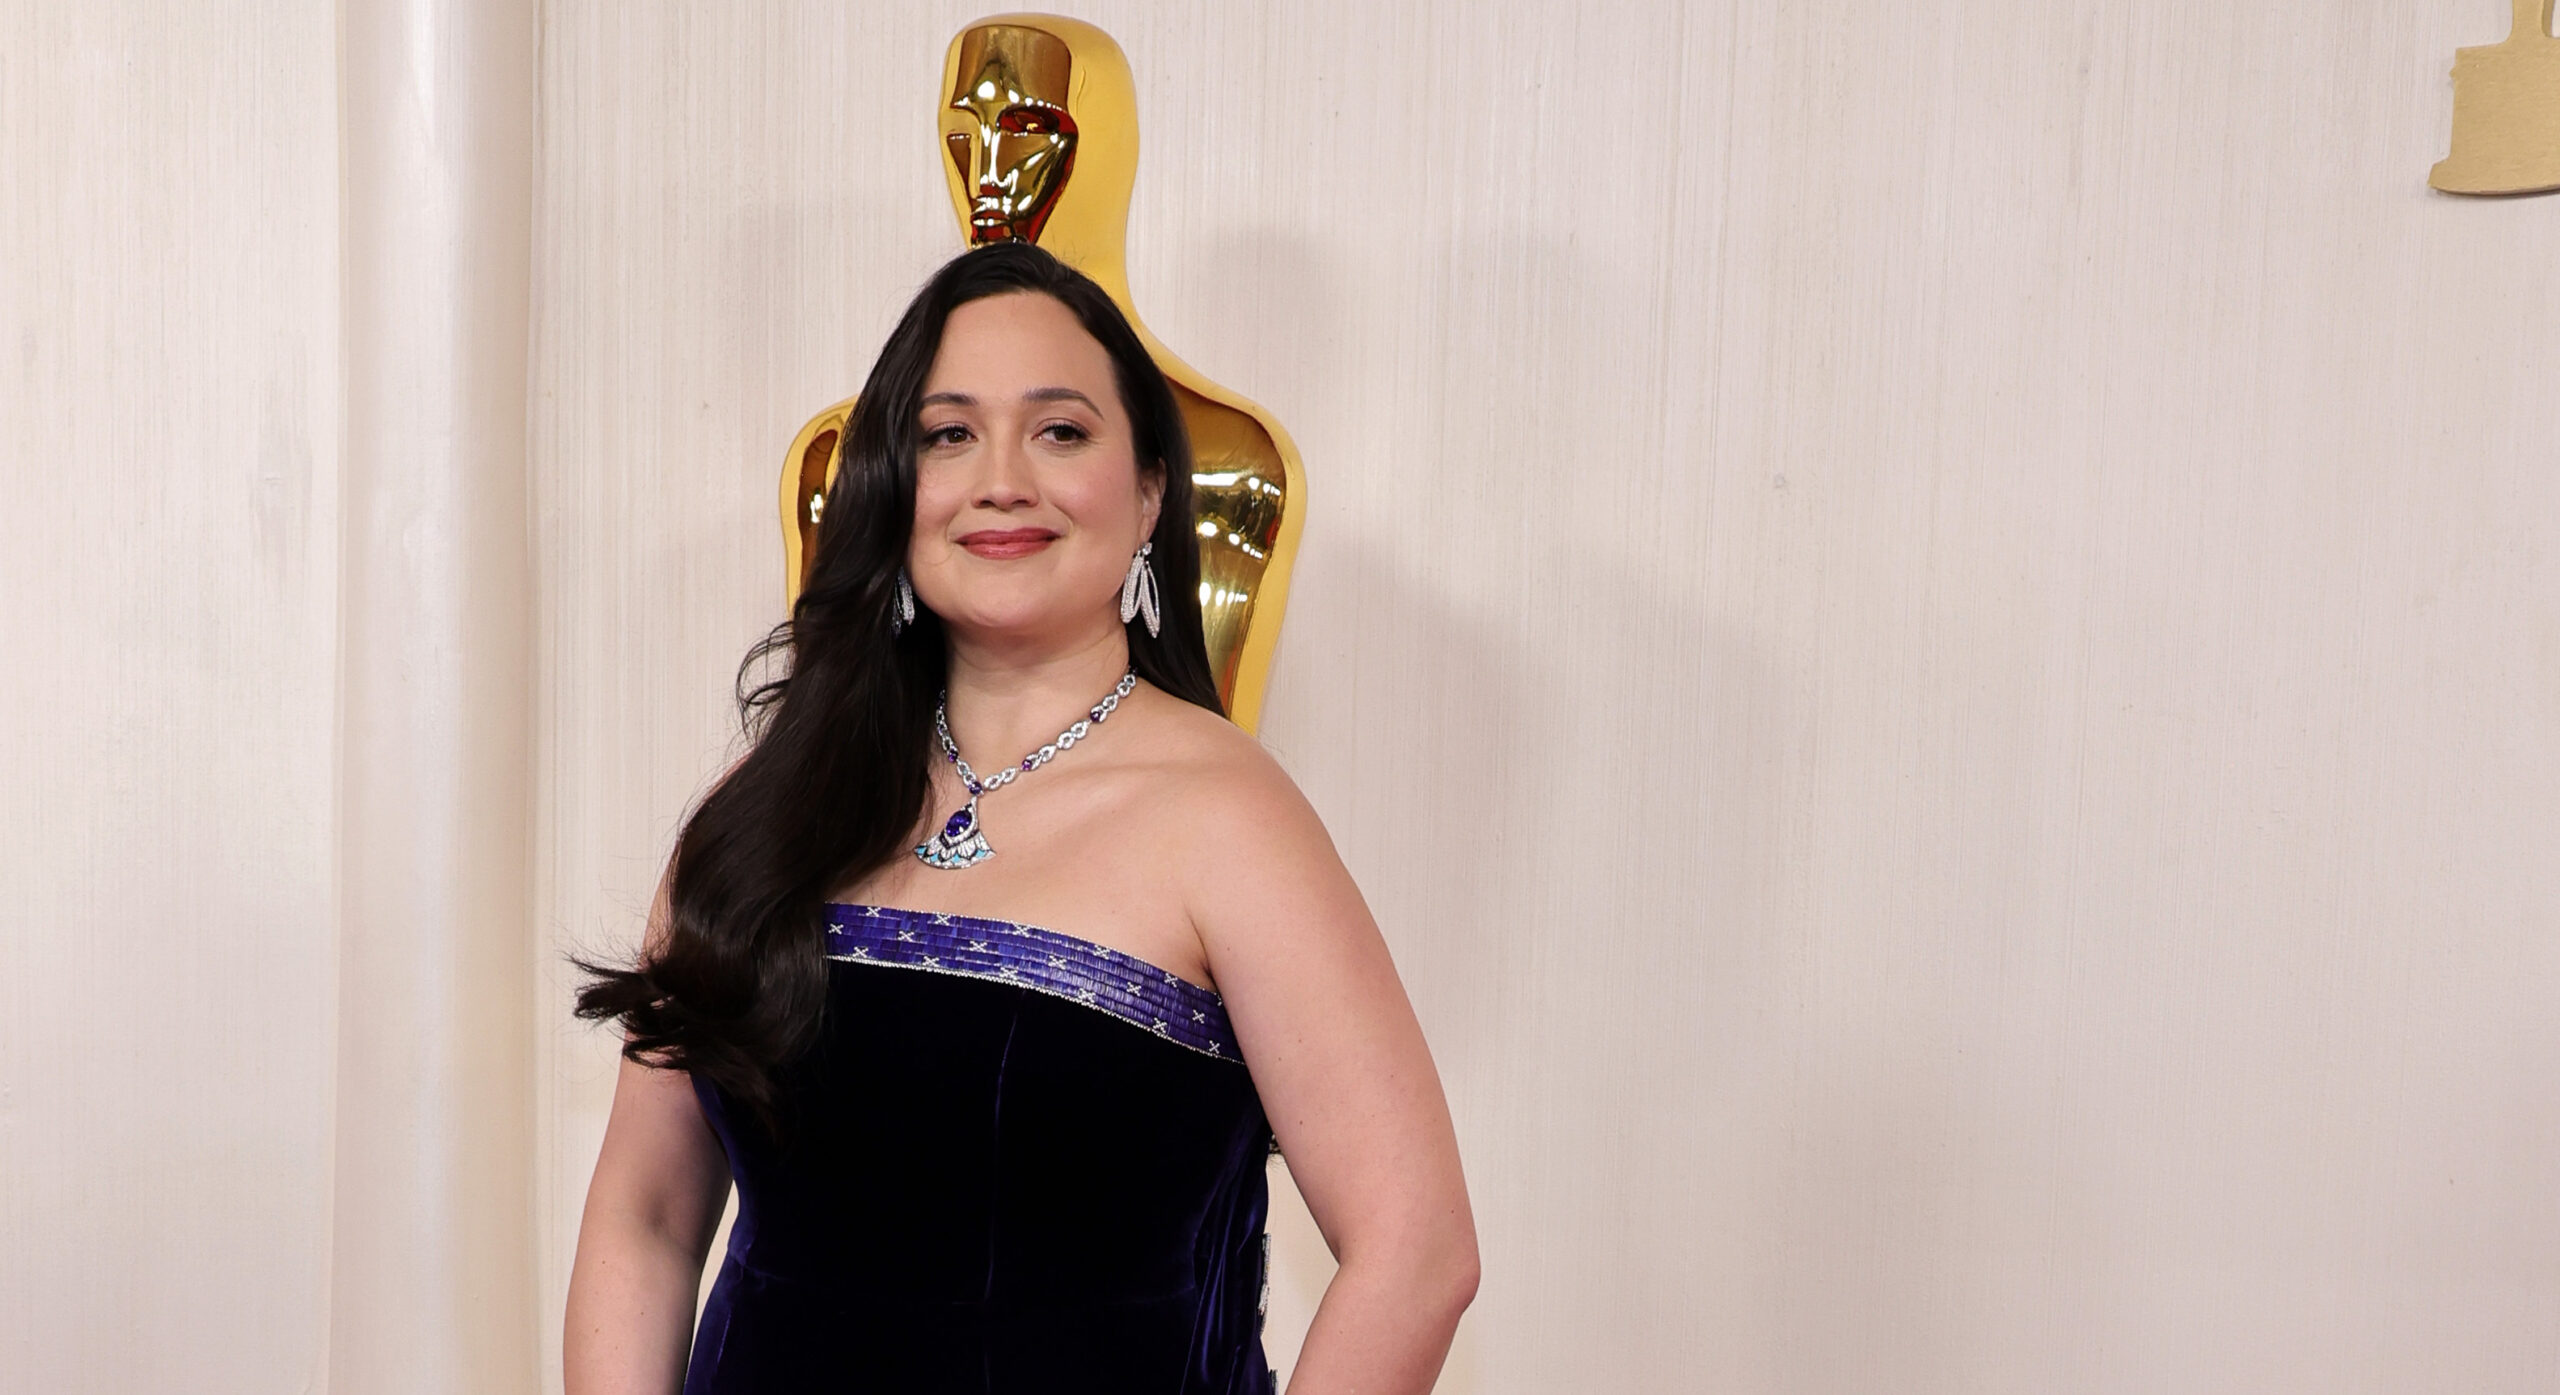 Lily Gladstone poses confidently at the 96th Annual Academy Awards, wearing a custom Gucci gown. The dress features a deep midnight blue color with a flowing train and is embellished with white quillwork patterns along the edges, celebrating her Indigenous heritage.